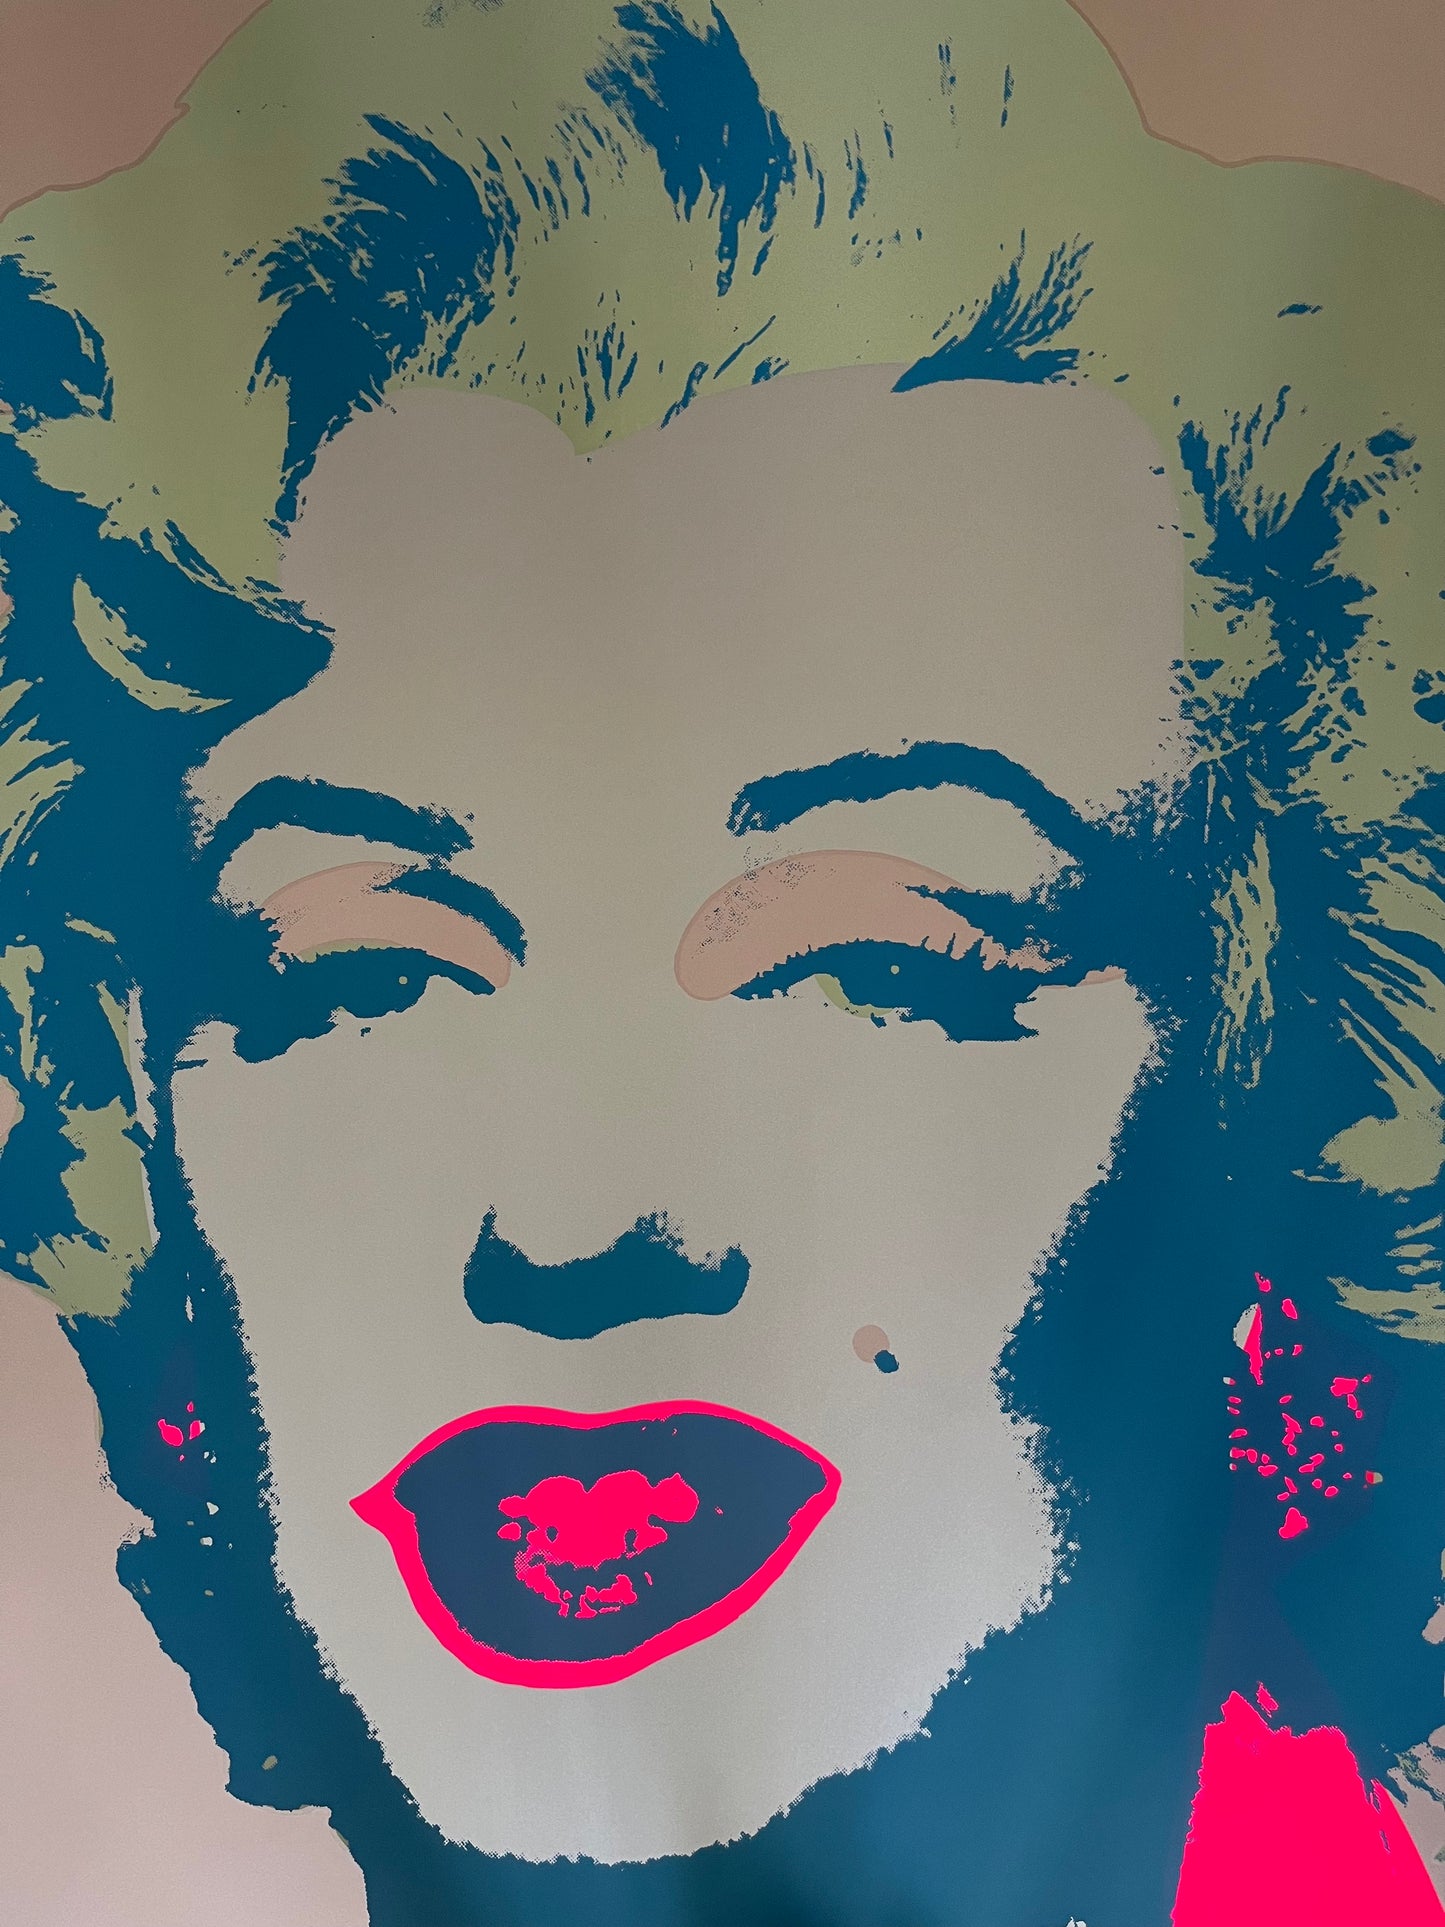 Andy Warhol - Marilyn Monroe - 1980 - Sérigraphie Officielle